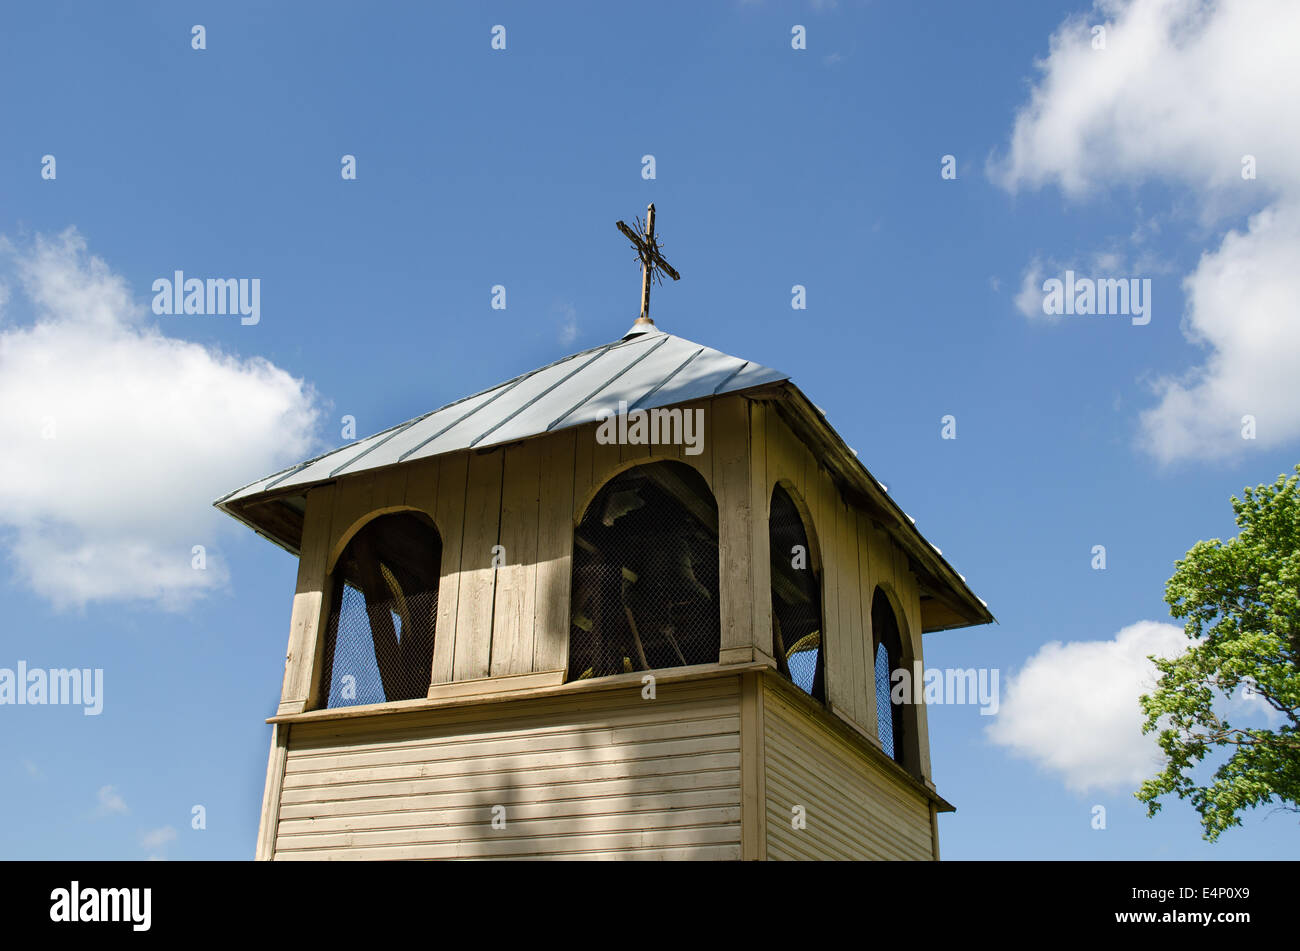 old wooden village church bell tower on blue spring sky background Stock Photo